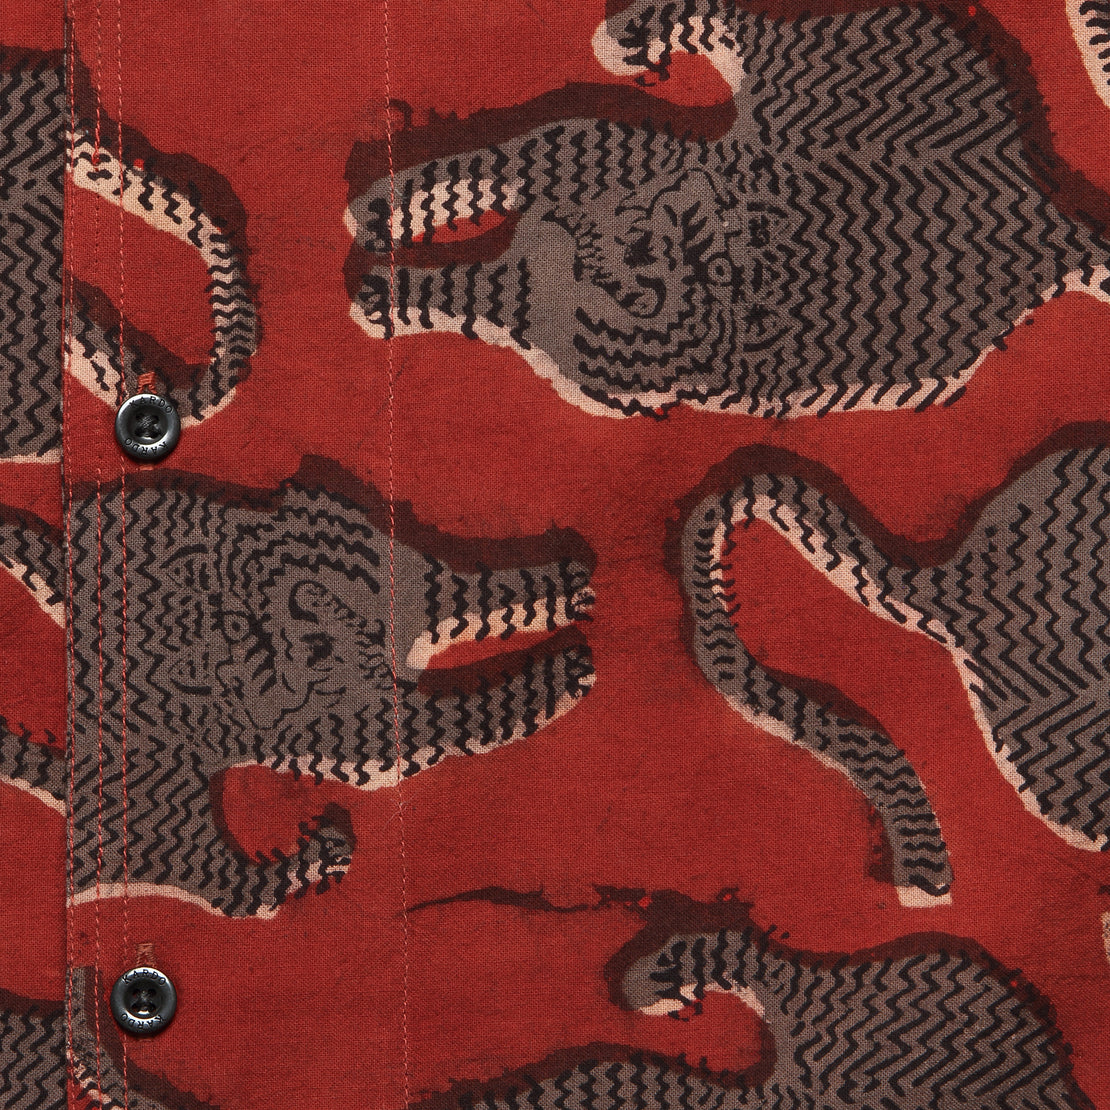 Chintan Tiger Block Print Shirt - Red/Black - Kardo - STAG Provisions - Tops - S/S Woven - Other Pattern